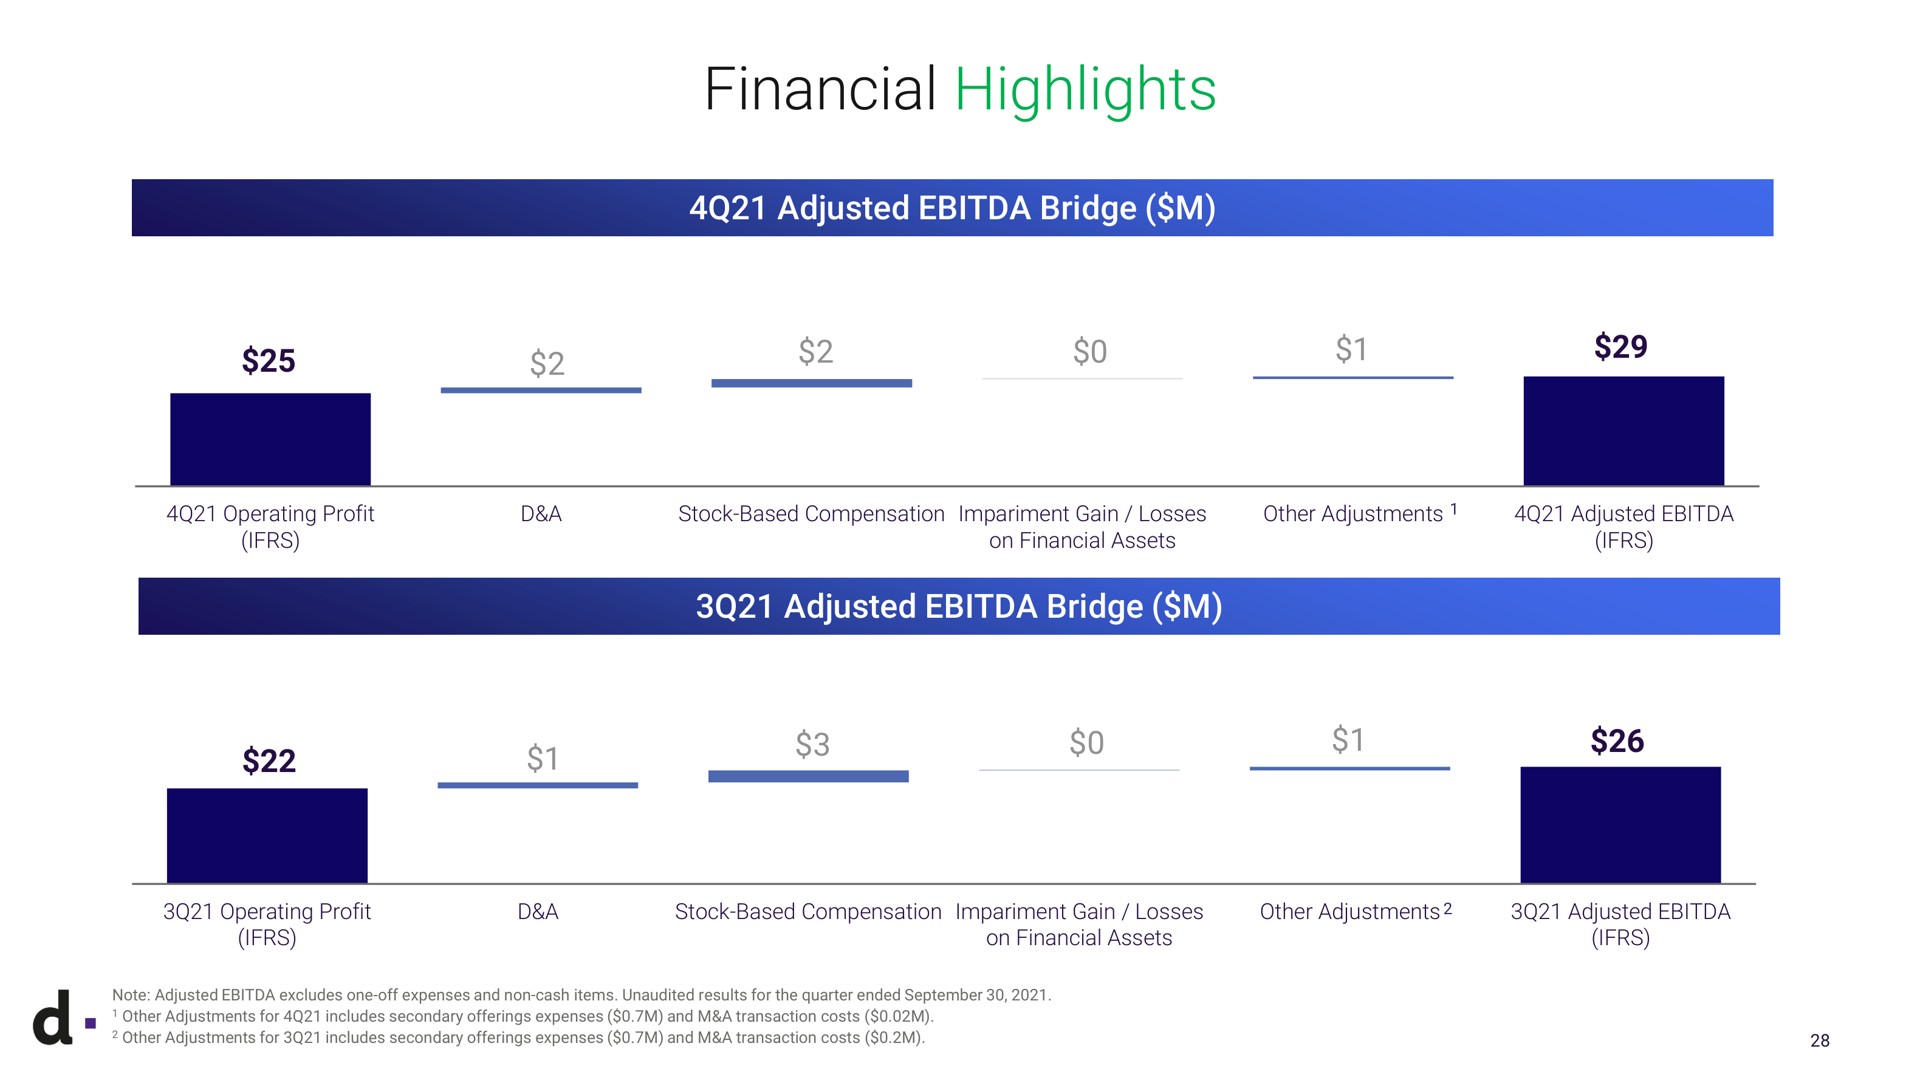 financial highlights so operating profit a stock based compensation gain losses other adjustments on assets adjusted adjusted bridge operating profit a stock based compensation gain losses other adjustments on assets adjusted a note adjusted excludes one off expenses and non cash items unaudited results for the quarter ended other adjustments for includes secondary offerings expenses and a transaction costs other adjustments for includes secondary offerings expenses and a transaction costs | dLocal